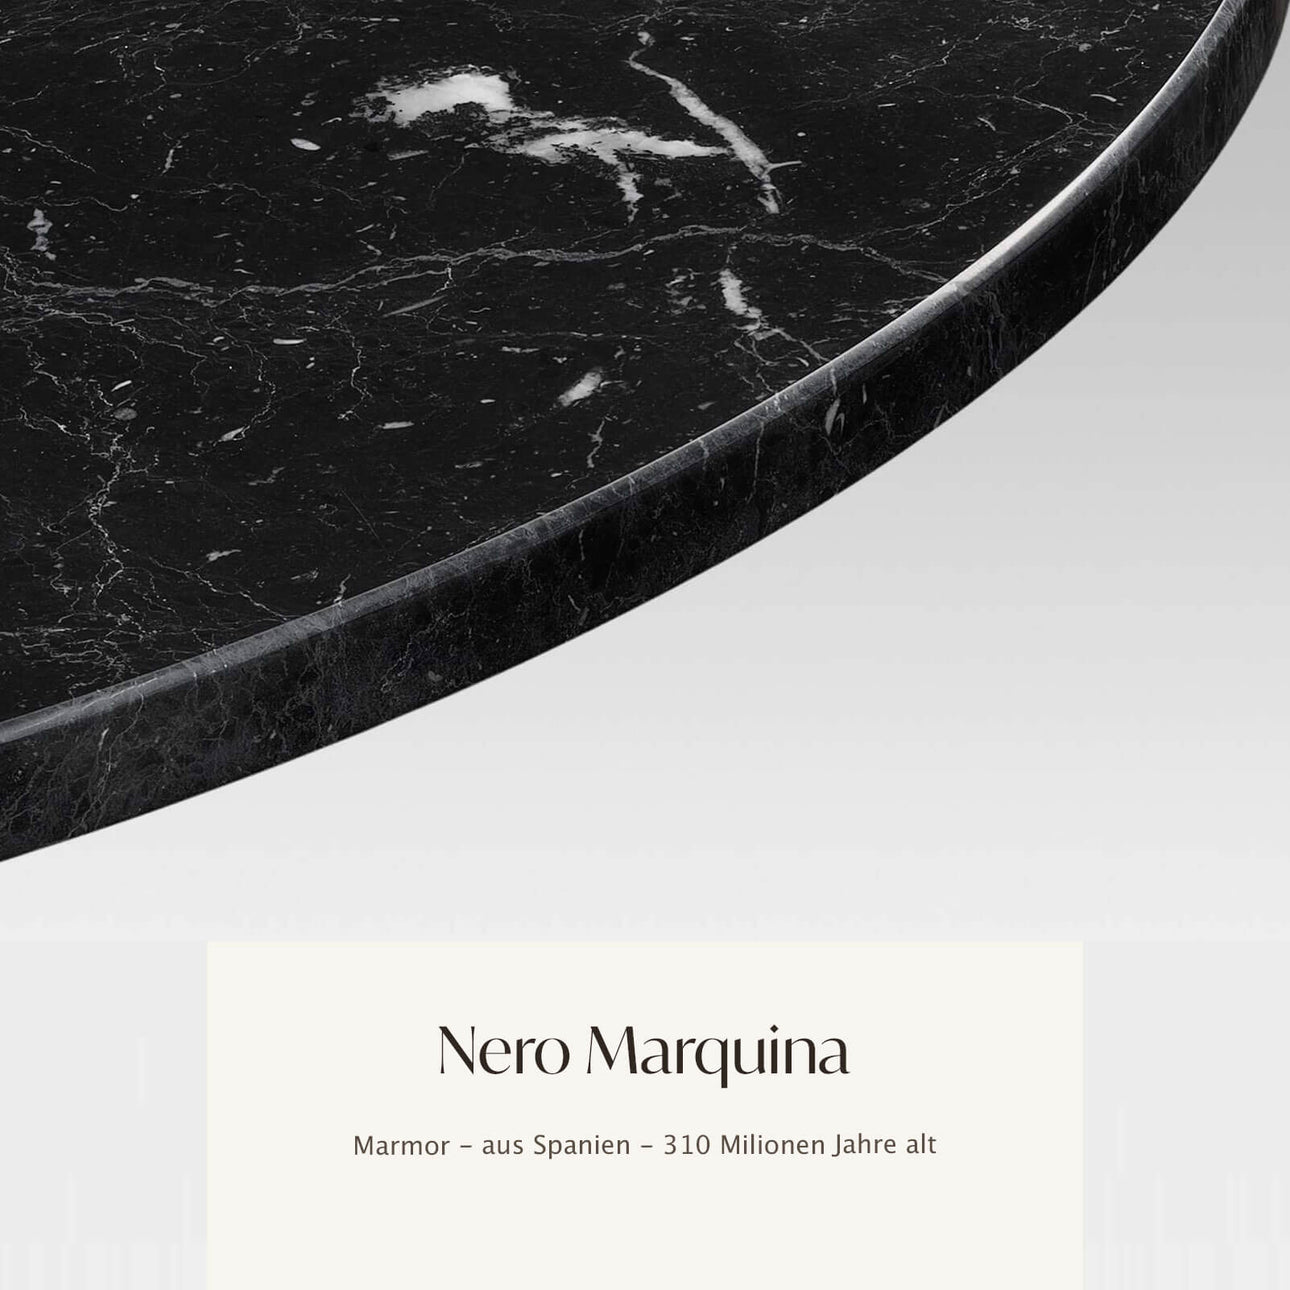 Round marble table top